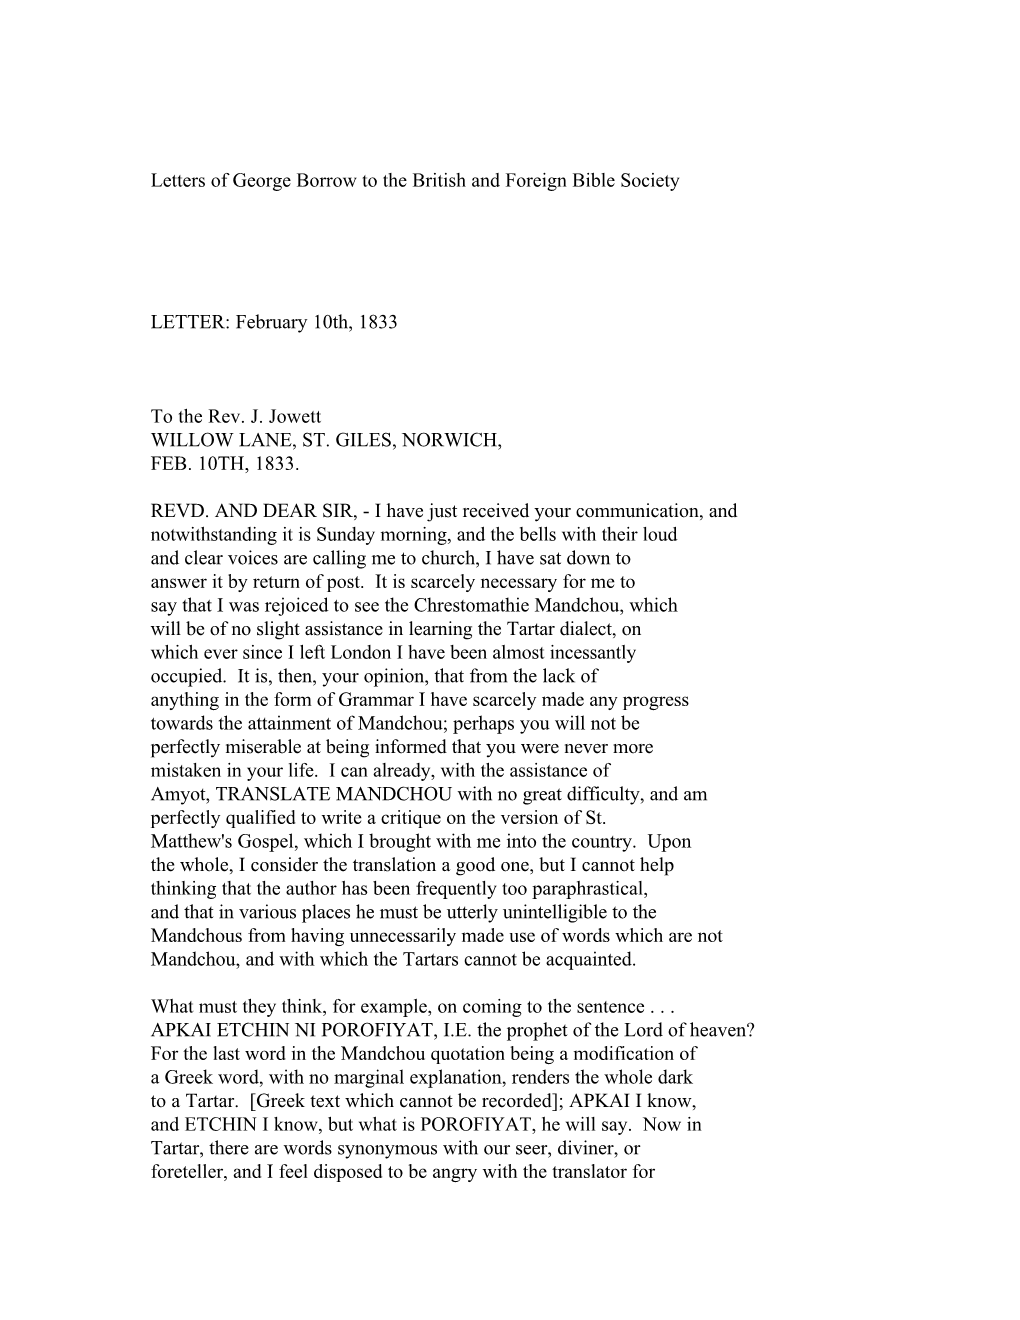 Letters of George Borrow to the British and Foreign Bible Society LETTER